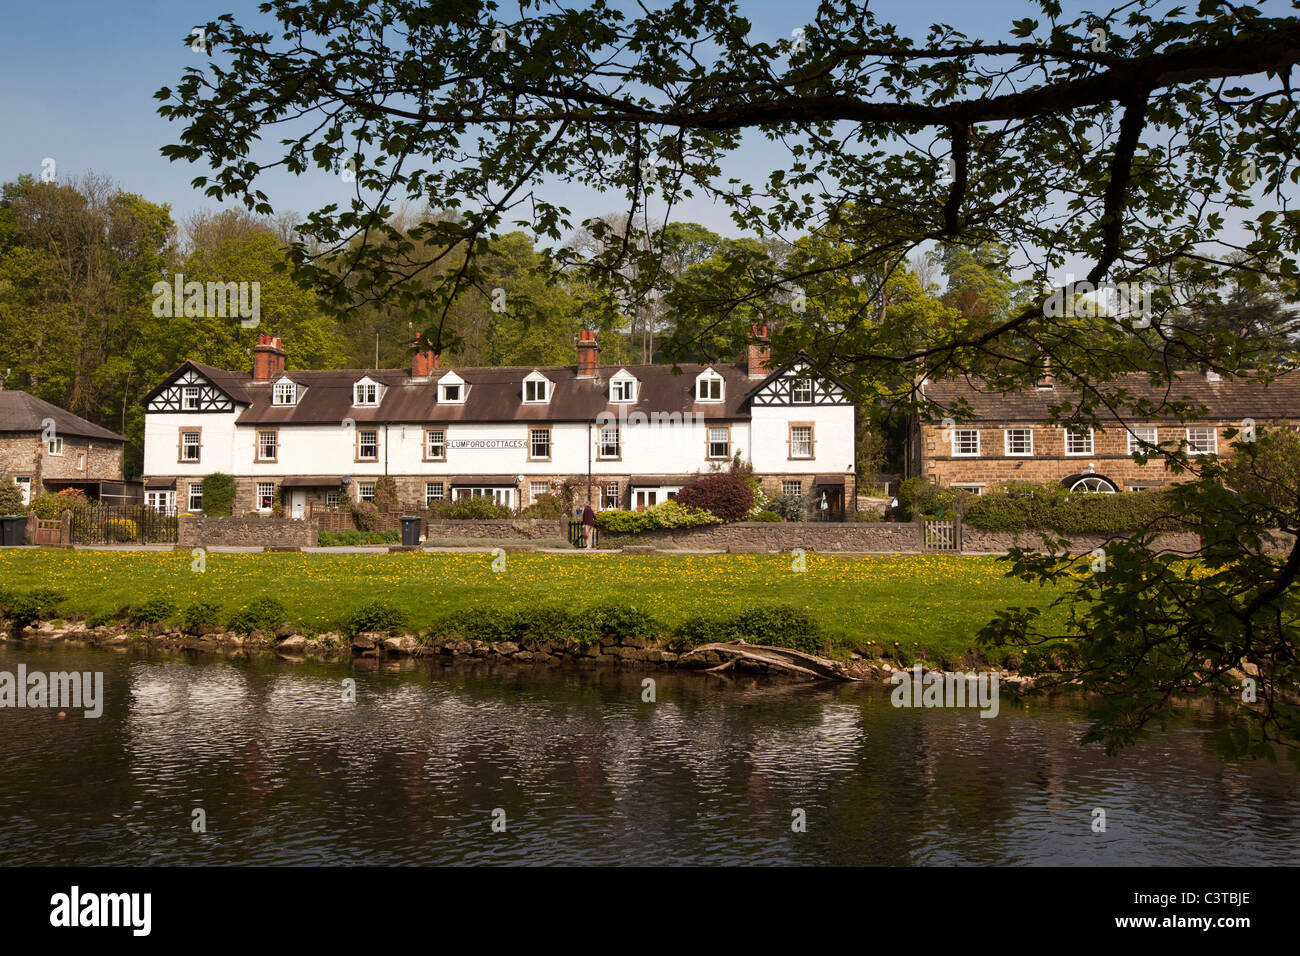 UK, Derbyshire, Peak District, Bakewell, Lumford cottages on banks of River Wye Stock Photo